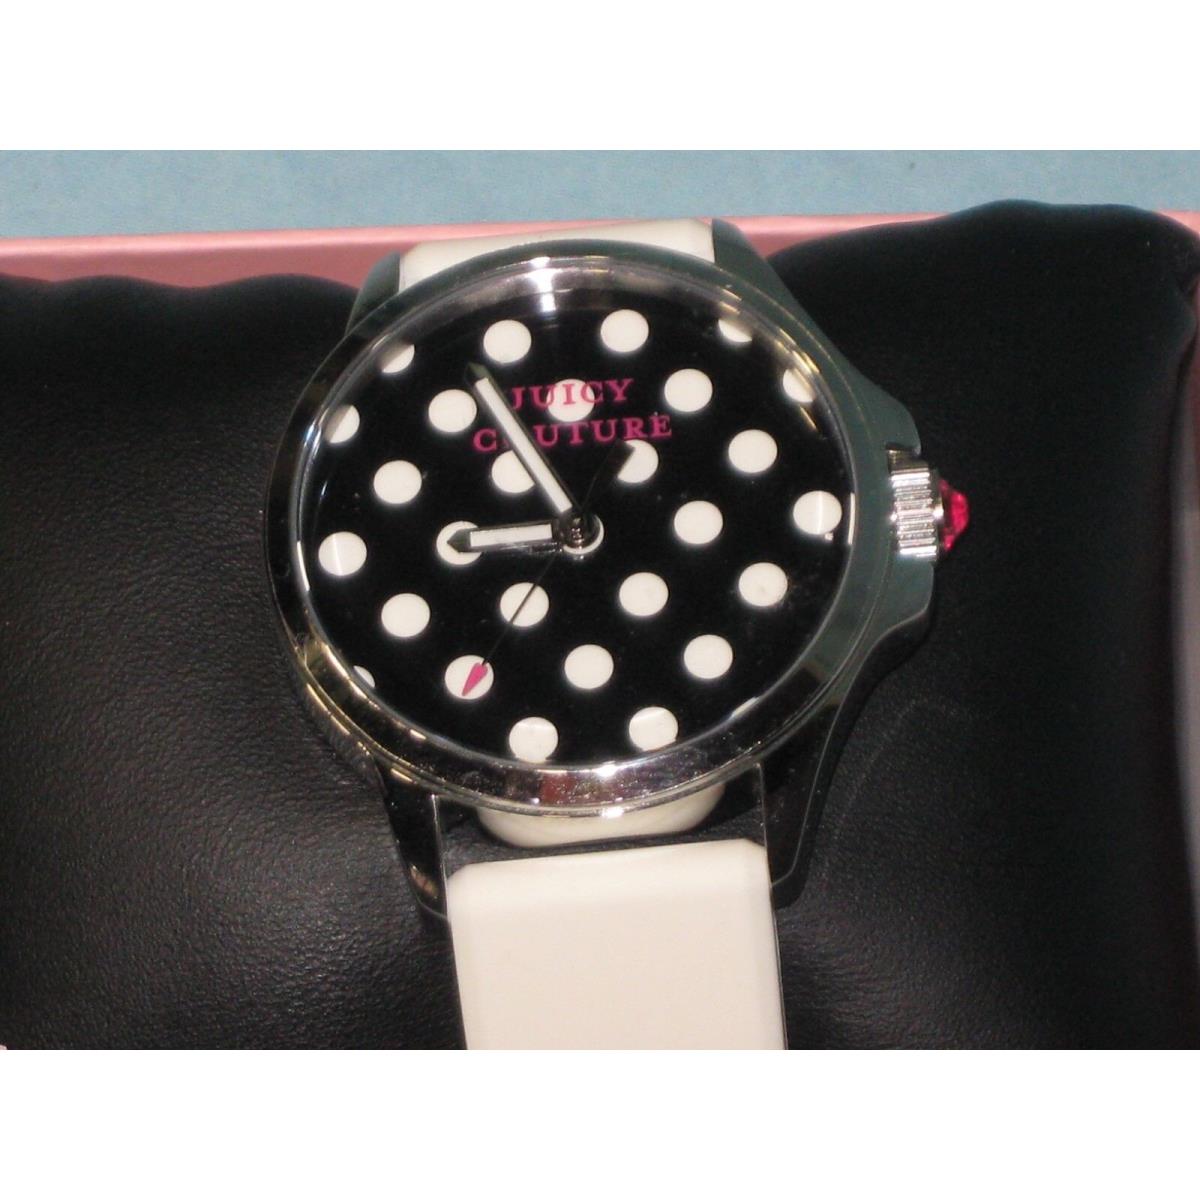 Juicy Couture watch  - Black Face, White Dial, White Band 2